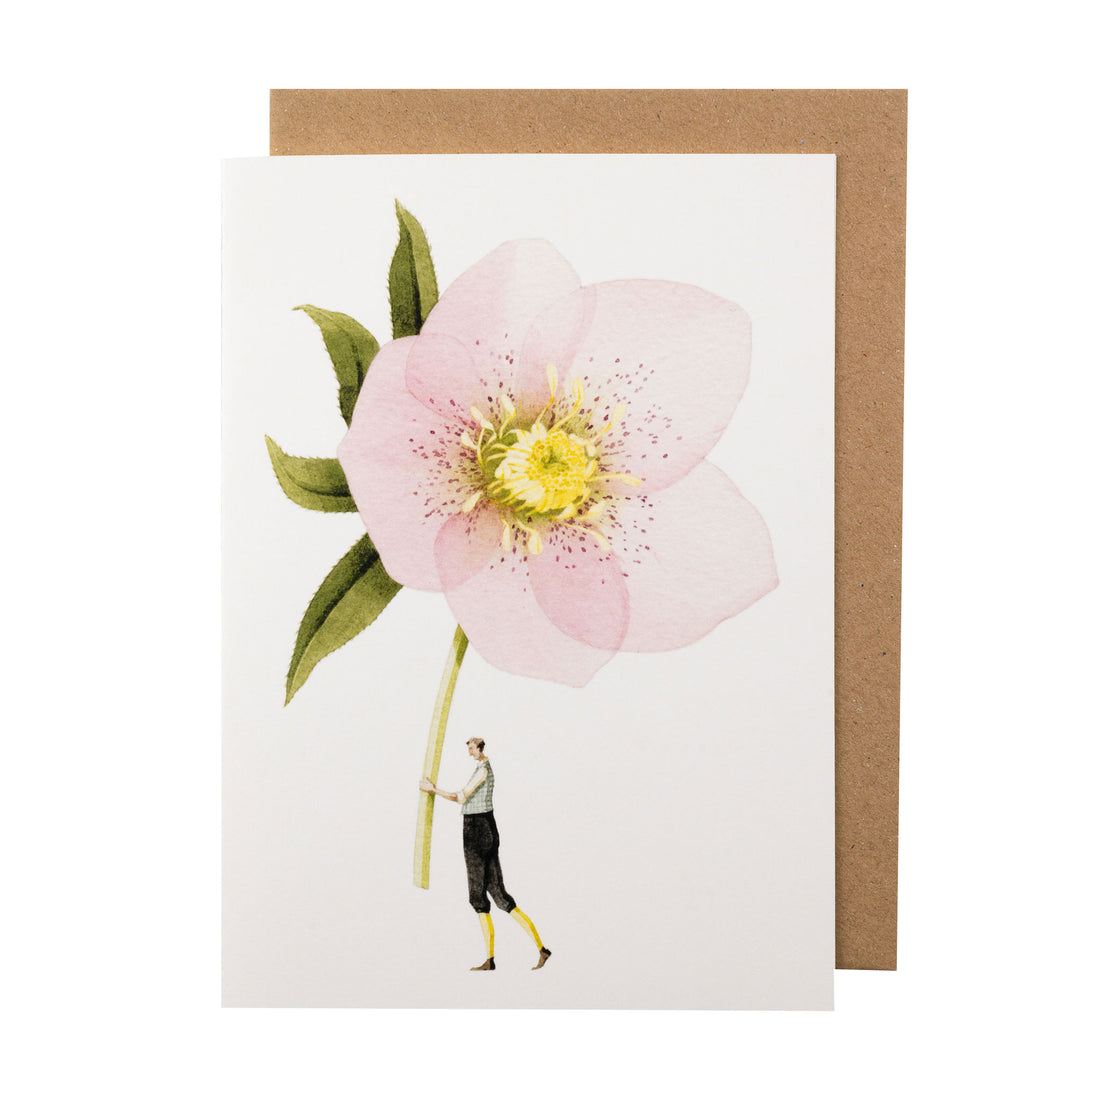 A Pink Hellebore Greeting Card with a woman holding a pink flower, printed on environmentally sustainable paper by Hester &amp; Cook.